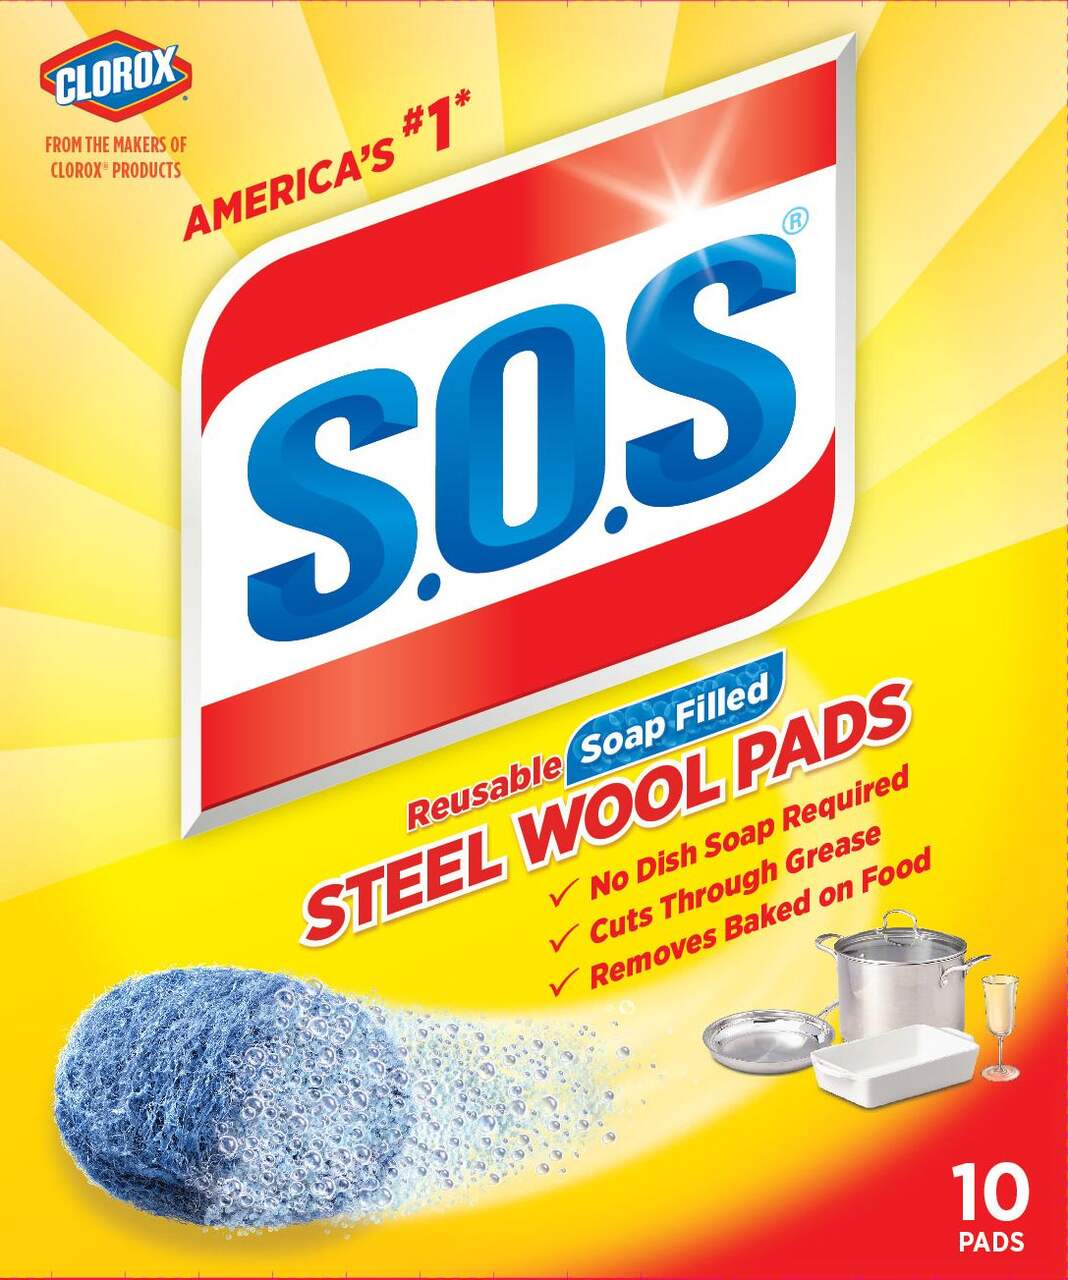 https://media-www.canadiantire.ca/product/living/cleaning/household-cleaning-tools/0530318/sos-scouring-pads-10-count-3f7bc482-8216-4928-a07a-735cb42a9b3a-jpgrendition.jpg?imdensity=1&imwidth=640&impolicy=mZoom